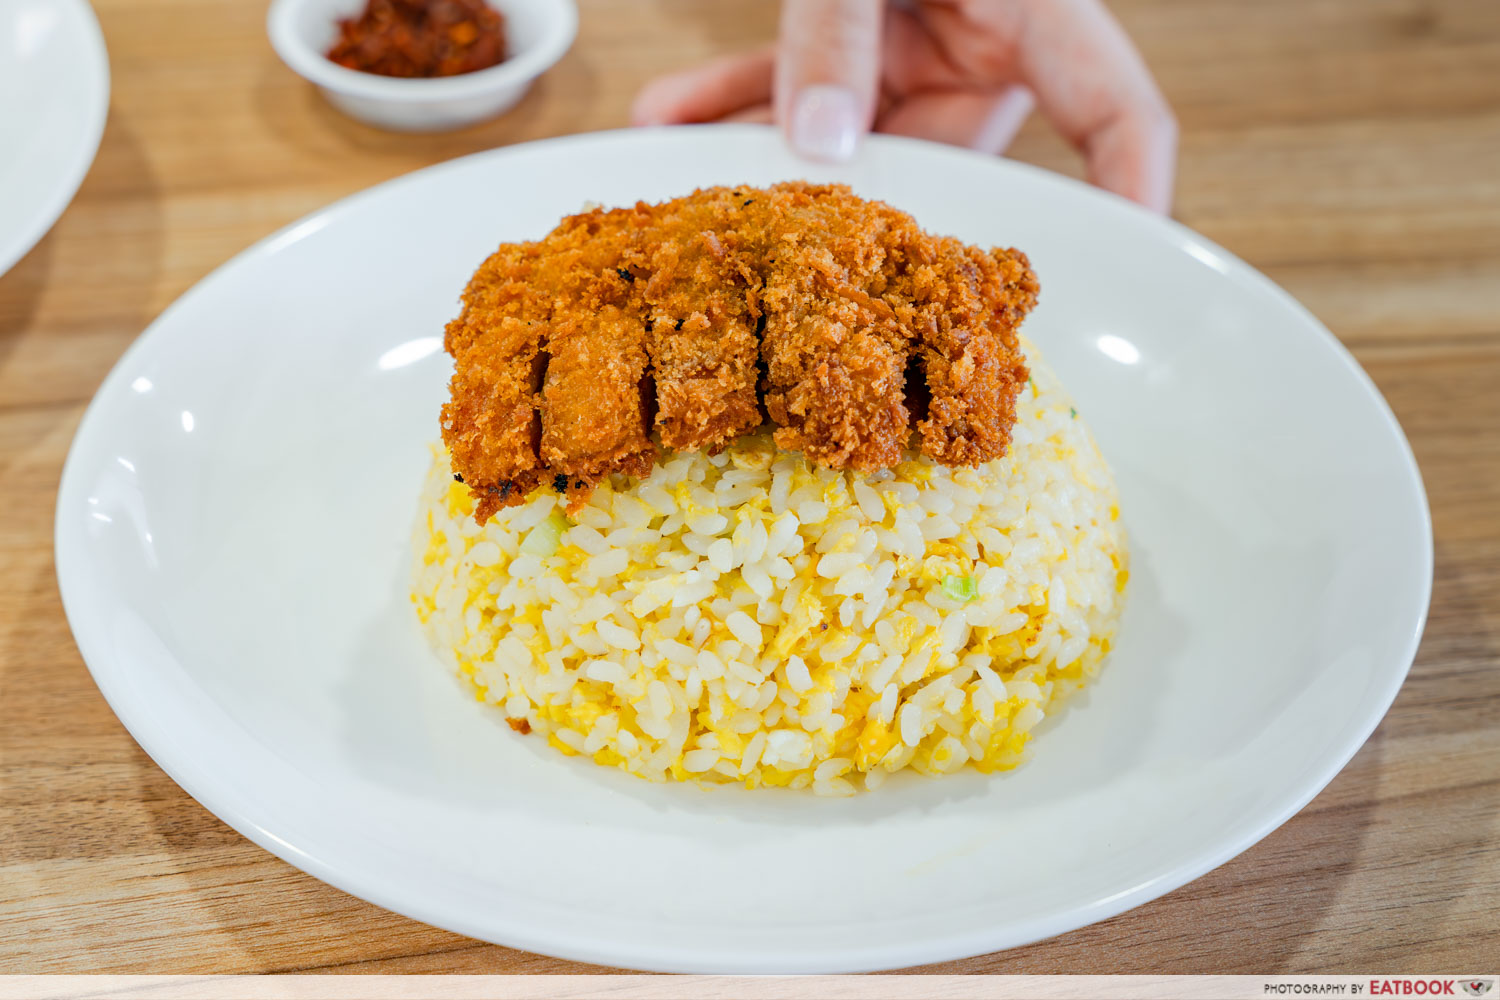 fried rice story - chicken cutlet egg fried rice